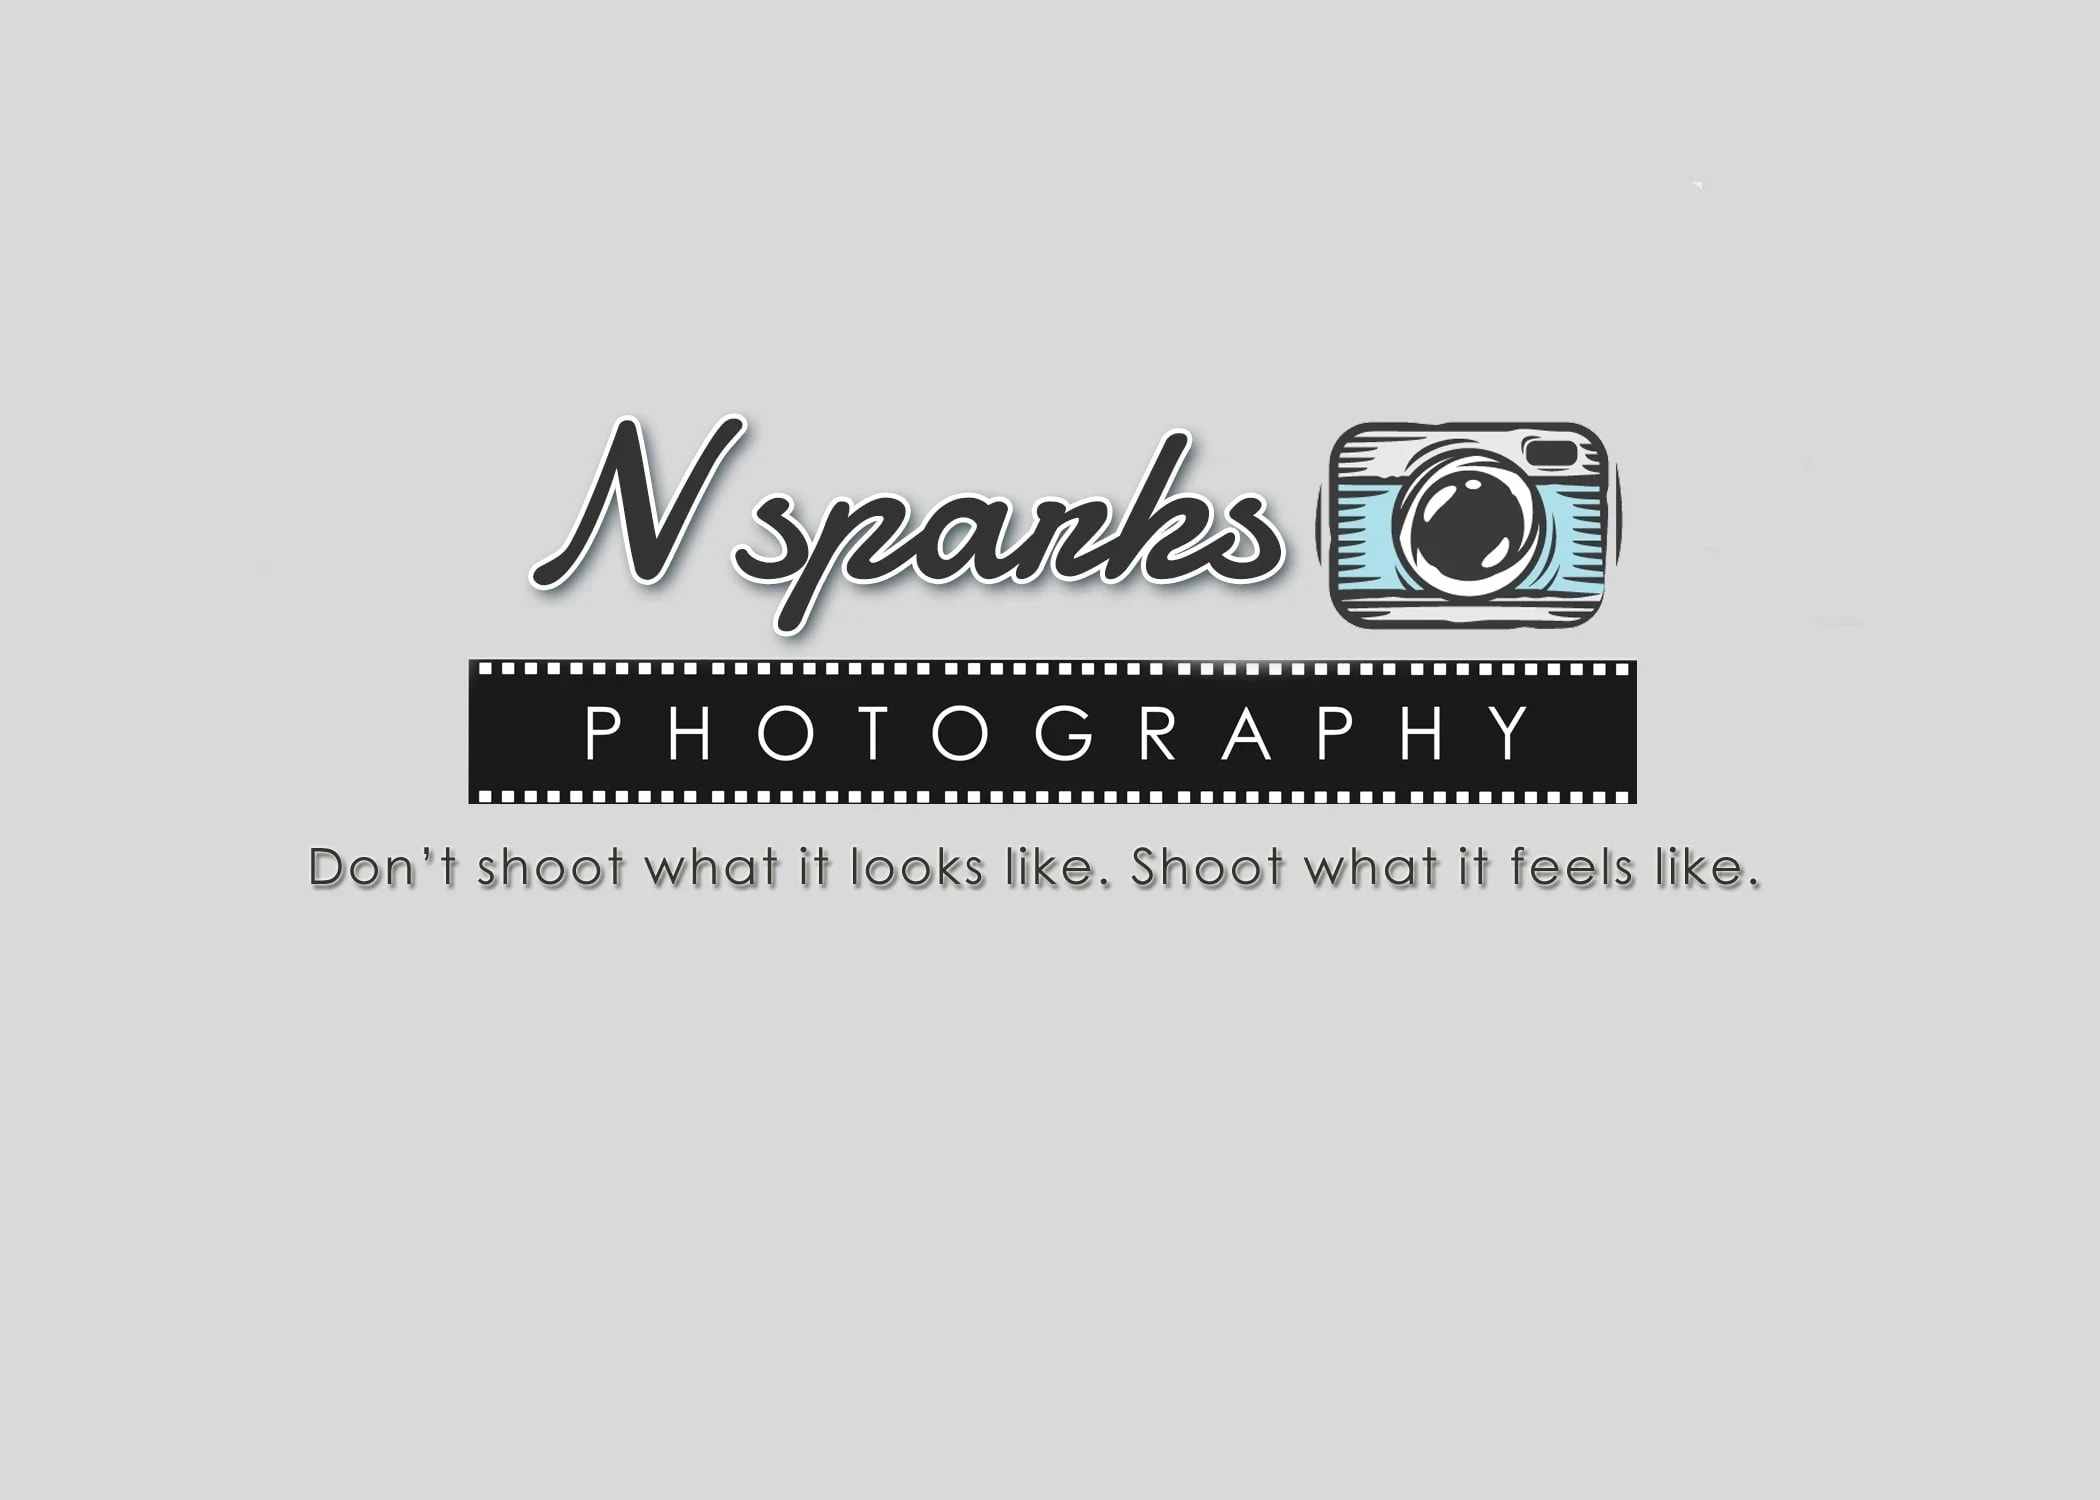 N Sparks Photography